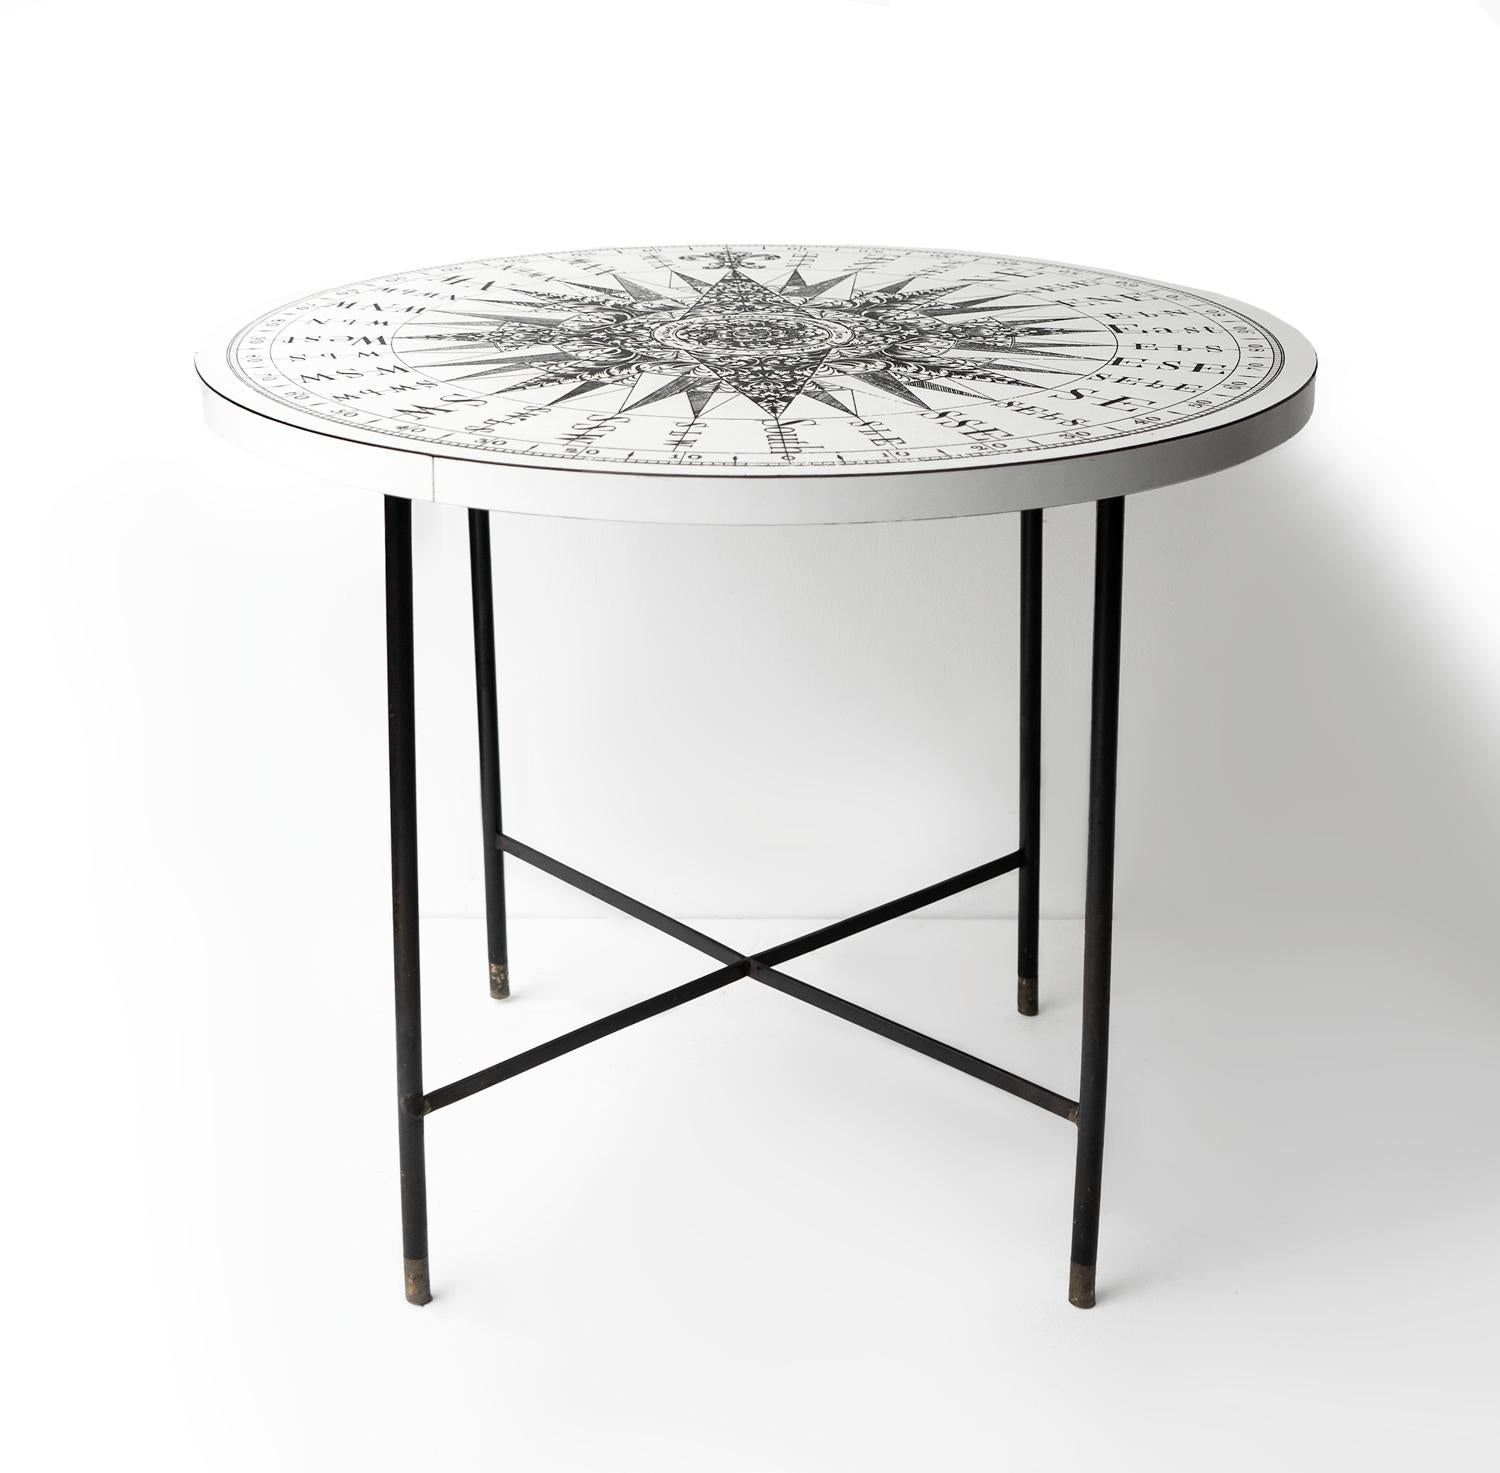 Italian Vintage Formica Compass Coffee/Side Table, Manner Of Fornasetti, Mid Century For Sale